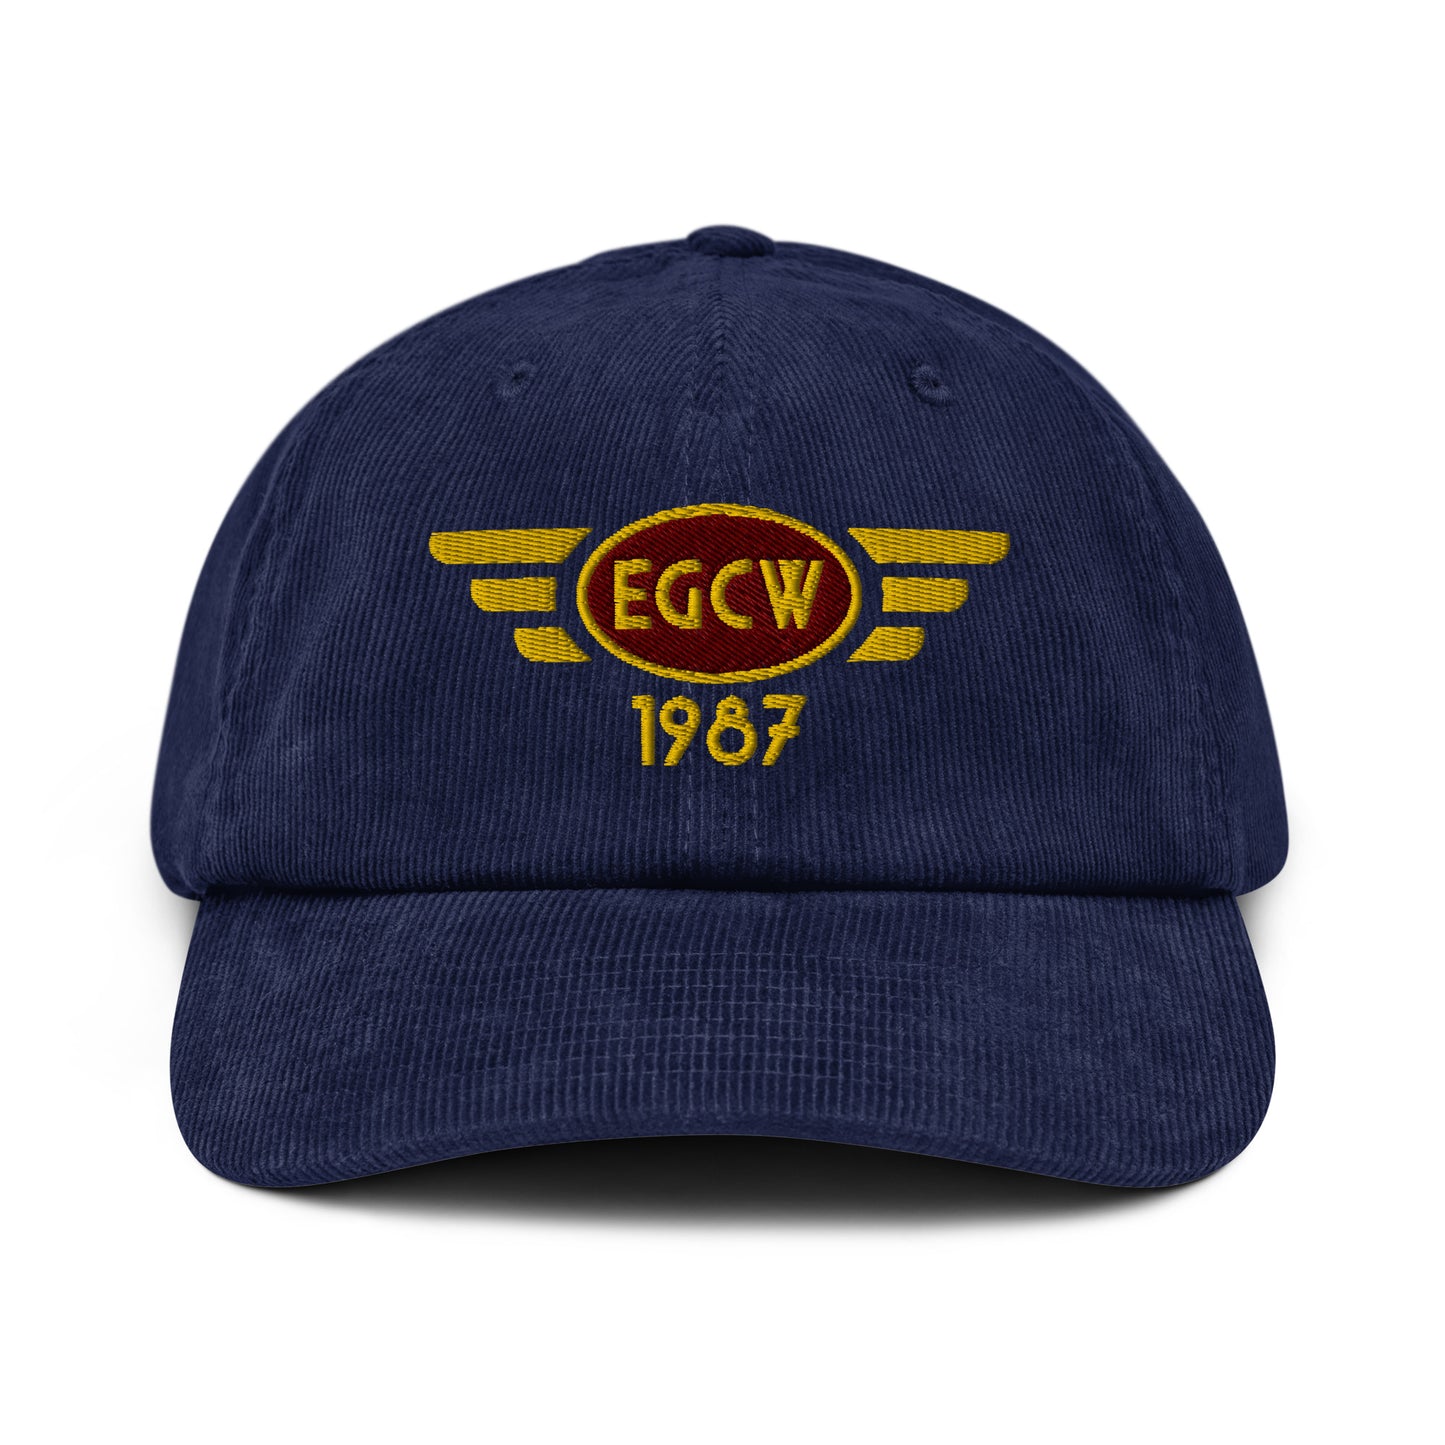 Welshpool Airport corduroy cap with embroidered ICAO code.